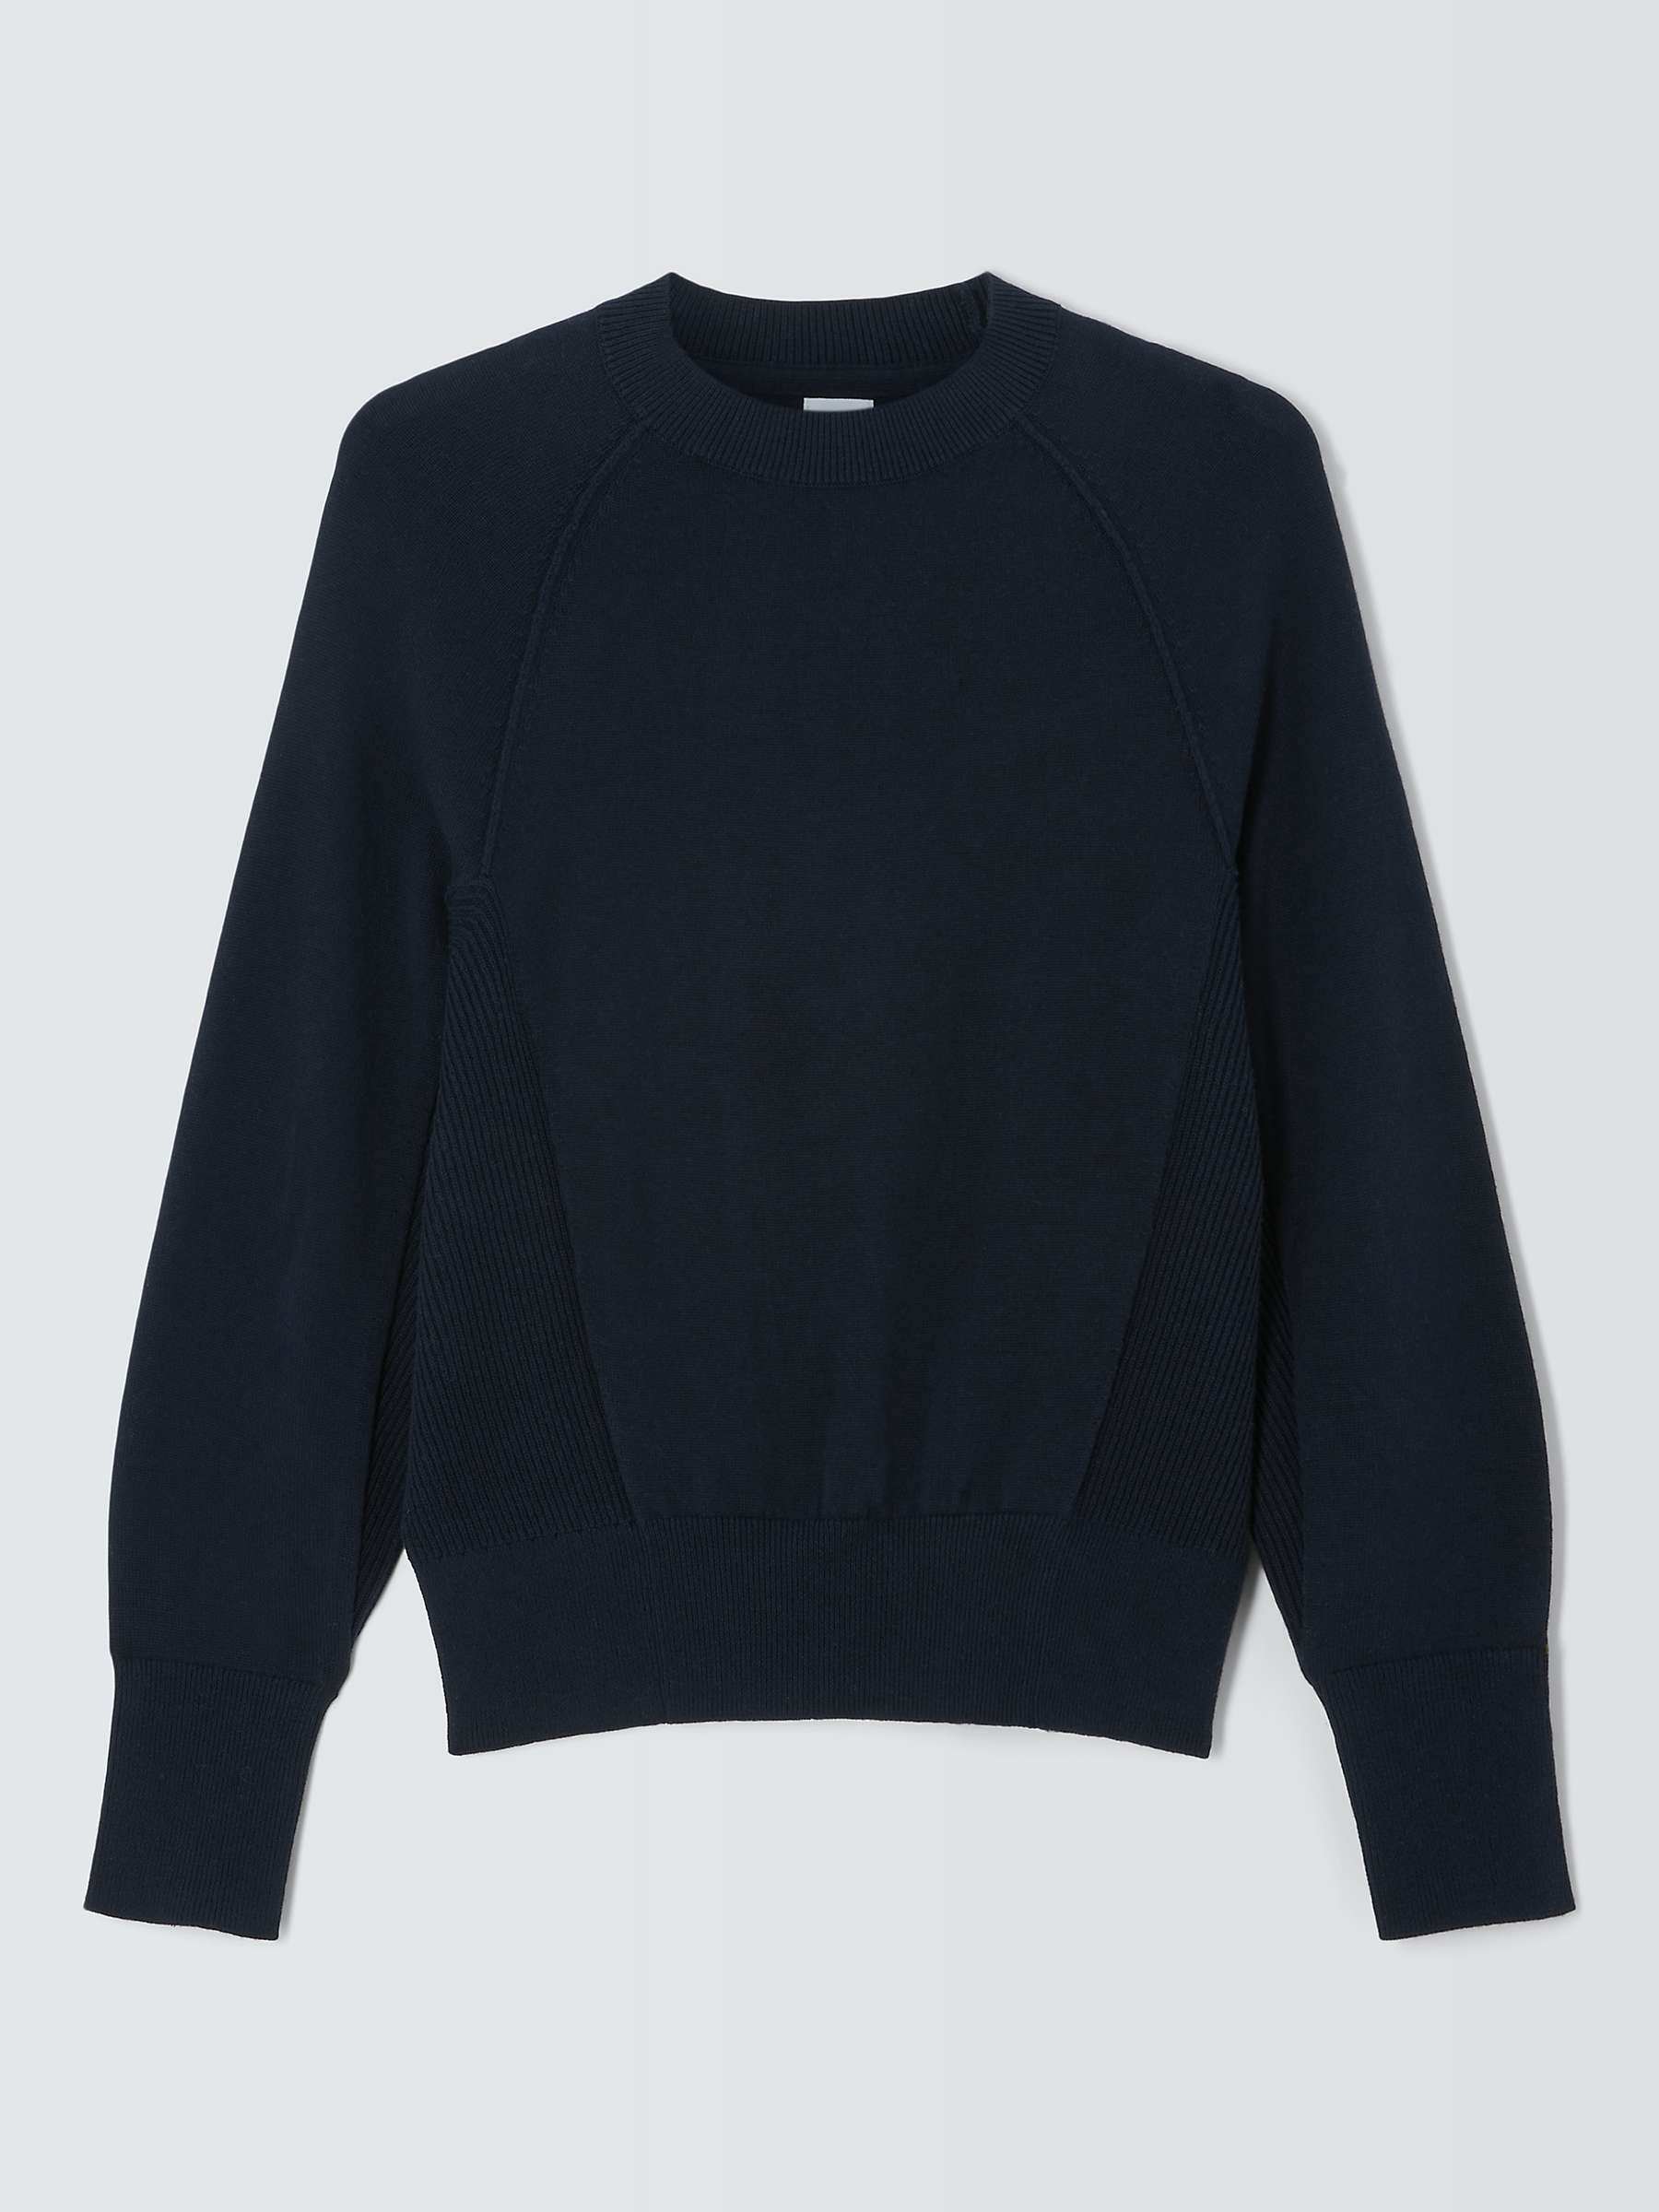 Buy John Lewis Cotton Knitted Sweater Online at johnlewis.com